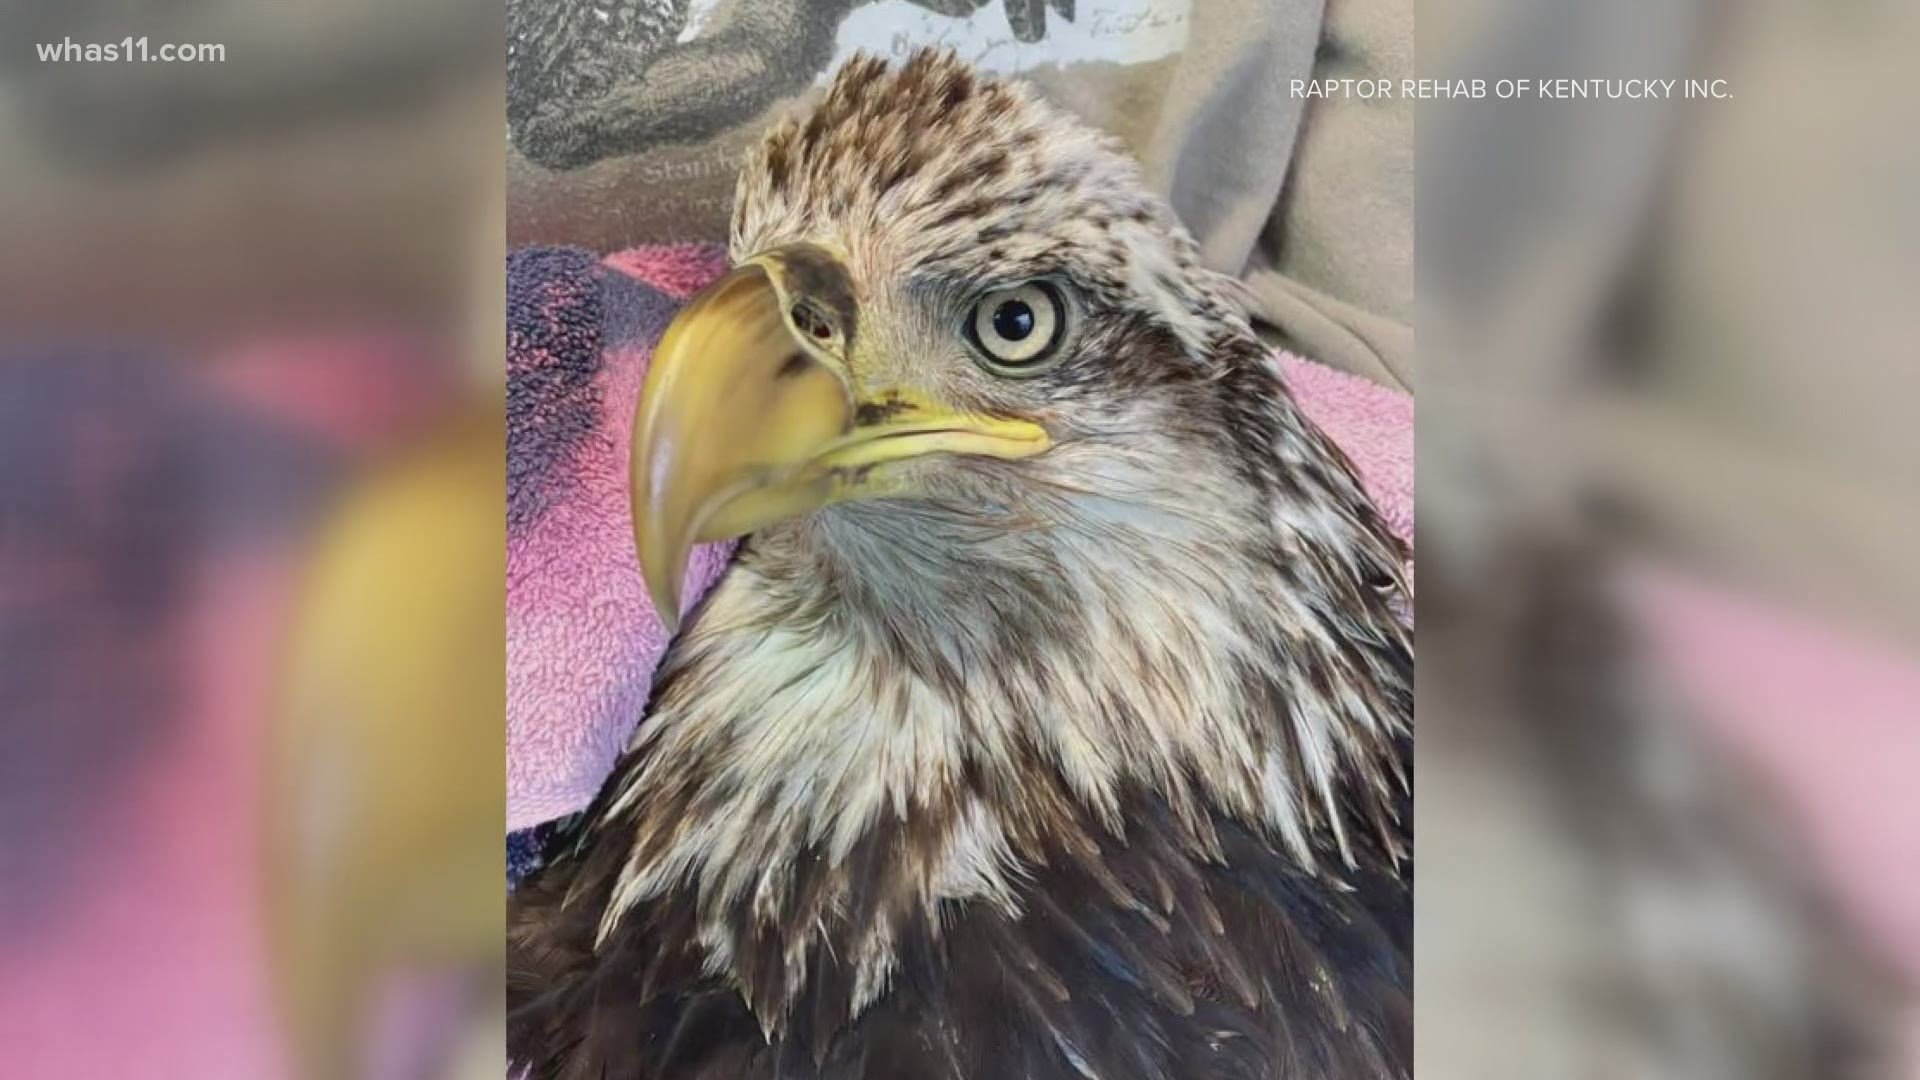 The rehabilitation center got the bald eagle after a volunteer participating in the annual bird count saw it in a creek bed at Bernheim forest.